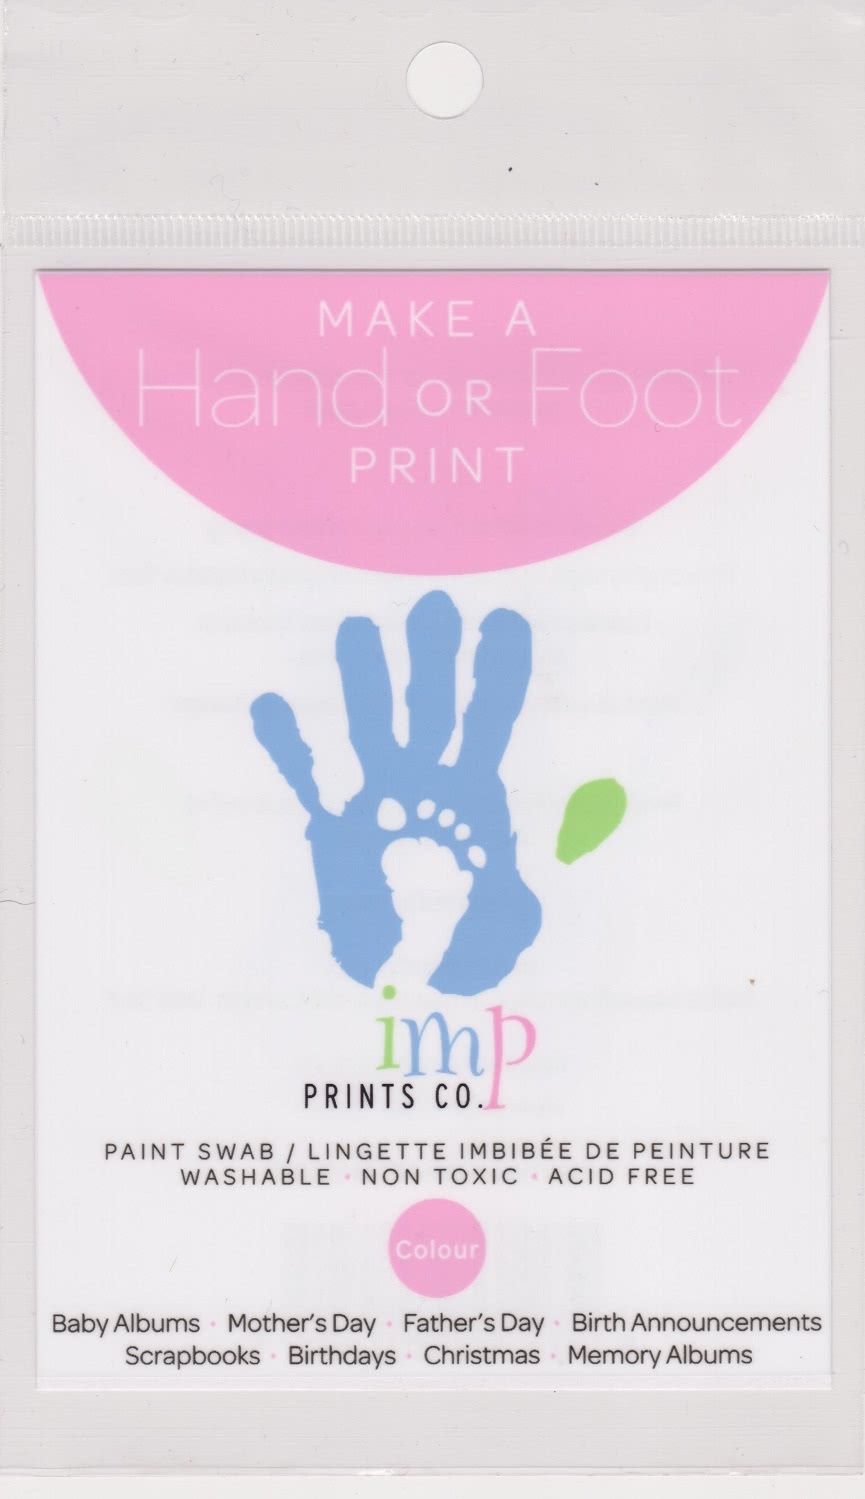 Picture of an Imp Prints co keepsakes for parents paint swab.A plastic pouch printed with "Make a Hand or foot print" Pink